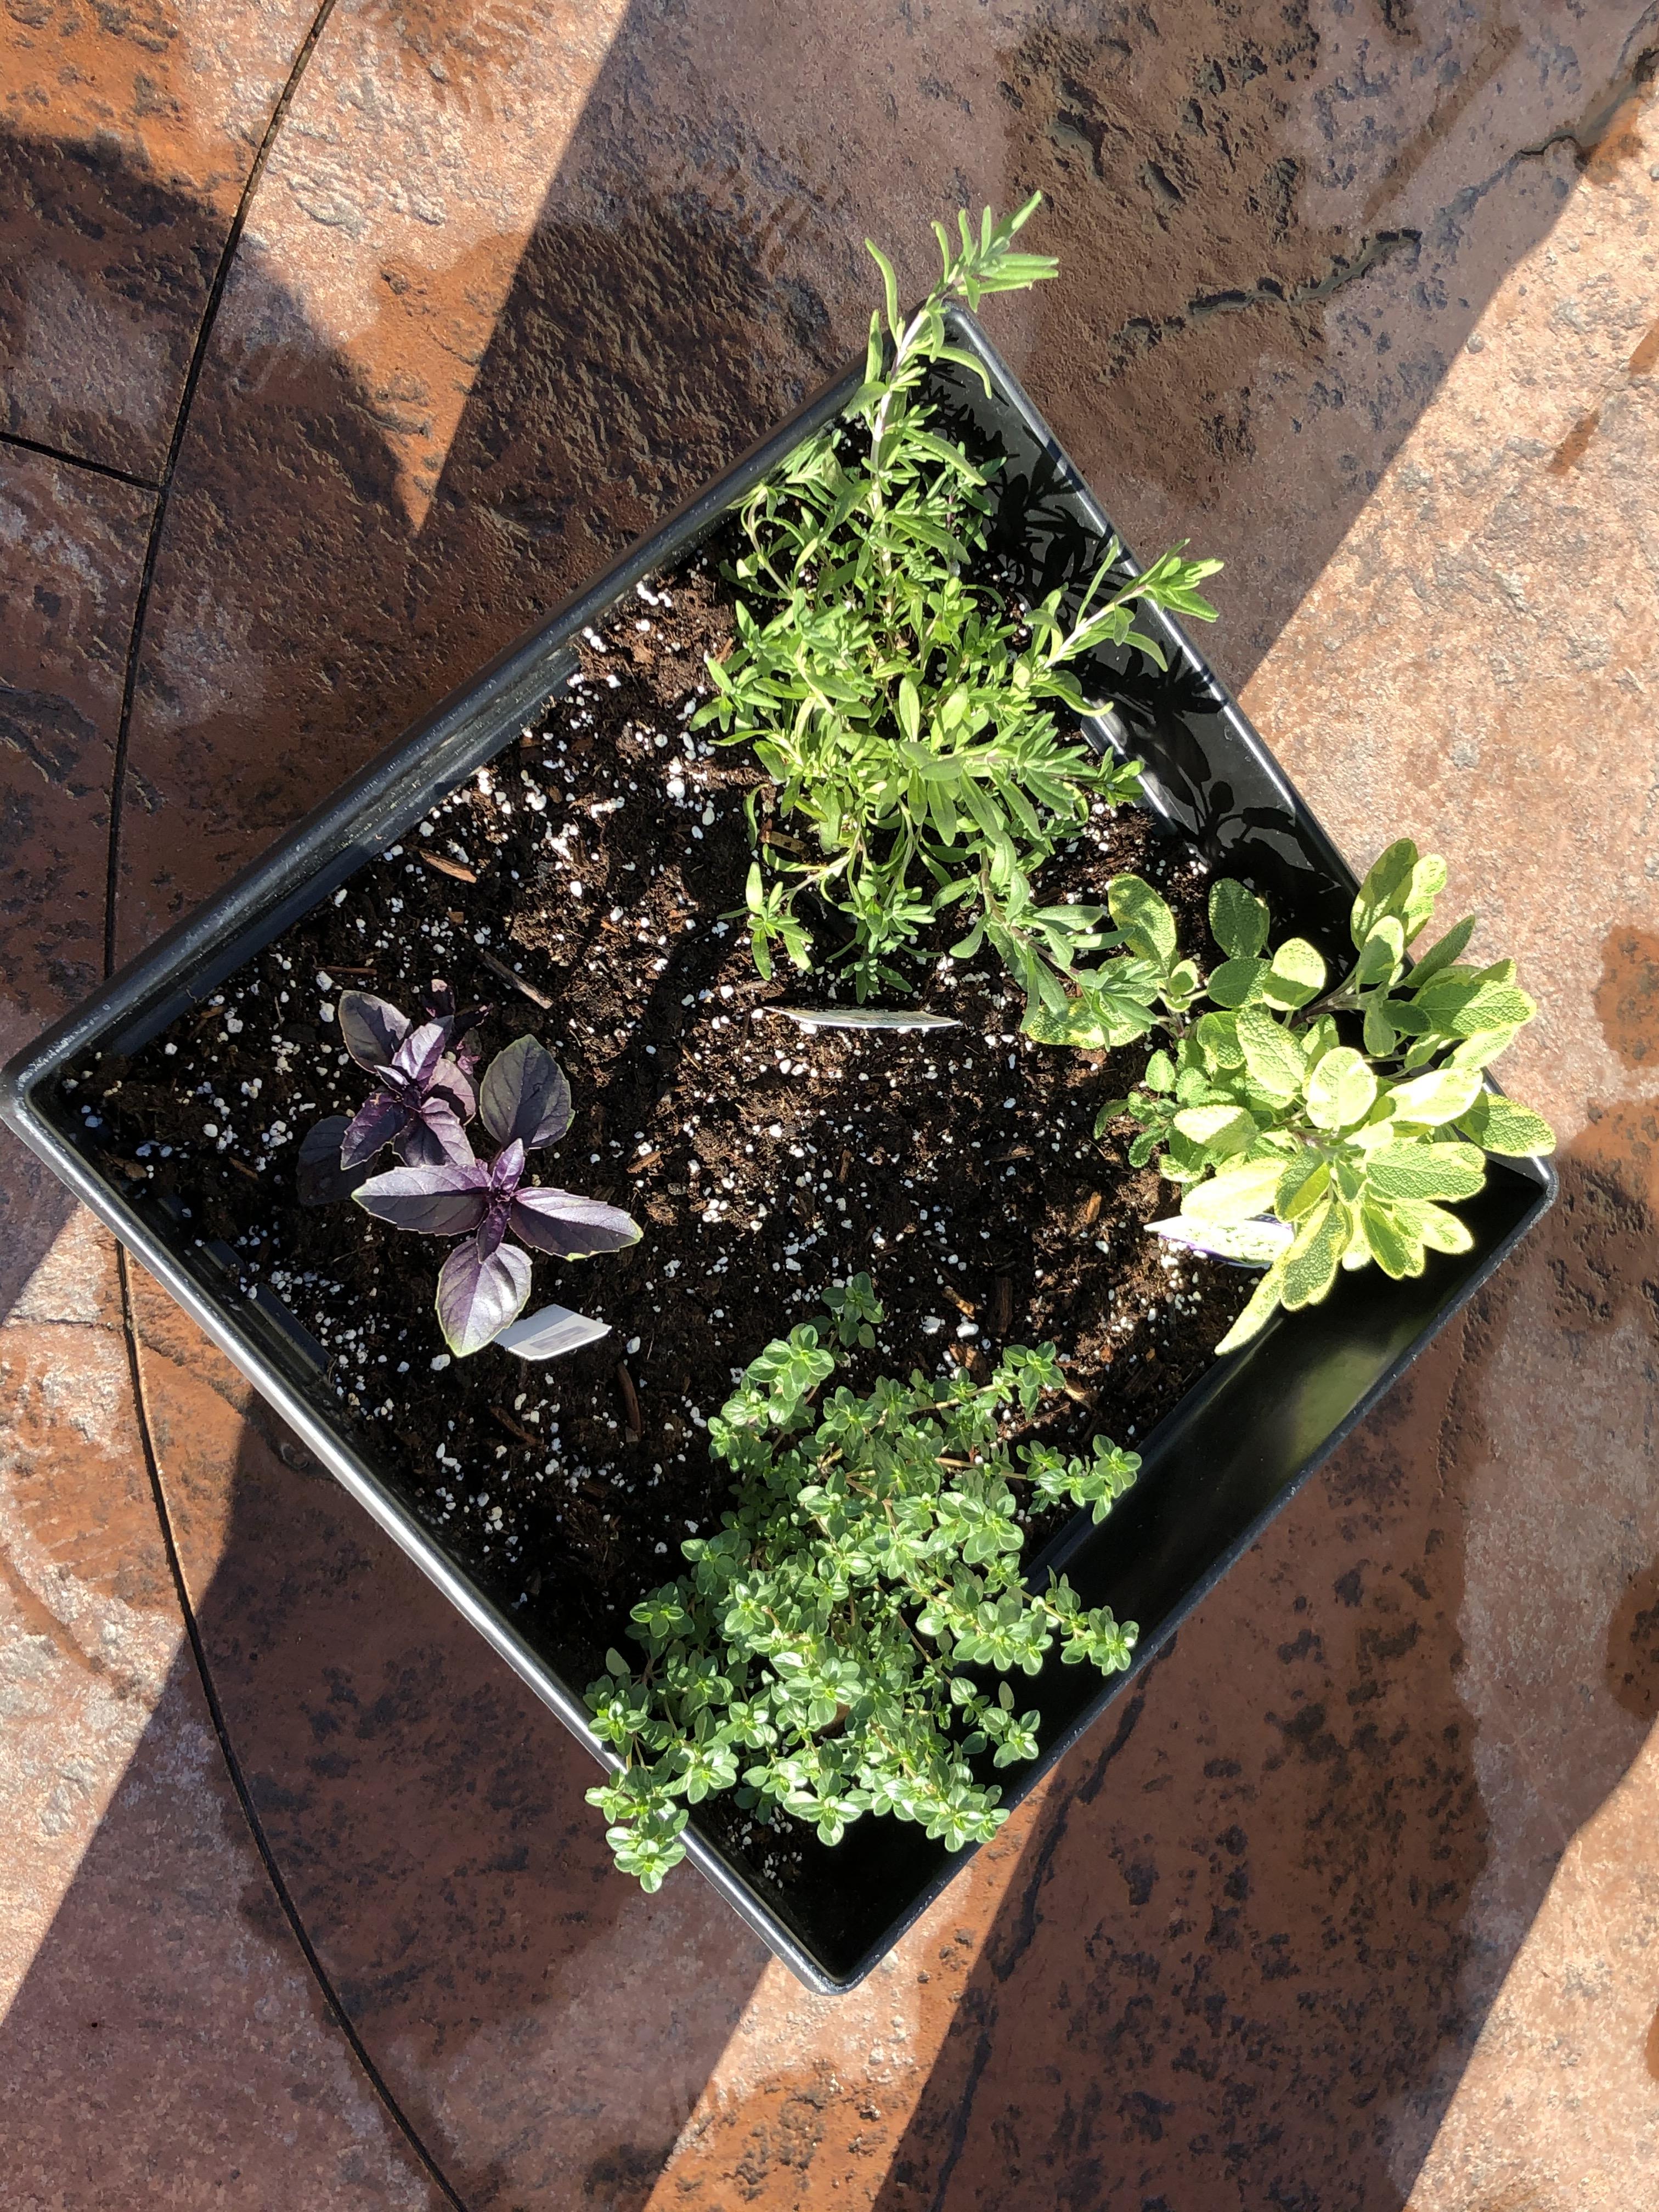 A newly planted pot of herbs contains ‘Red Rubin’ basil, lavender, golden sage and lemon thyme. (NDSU photo)